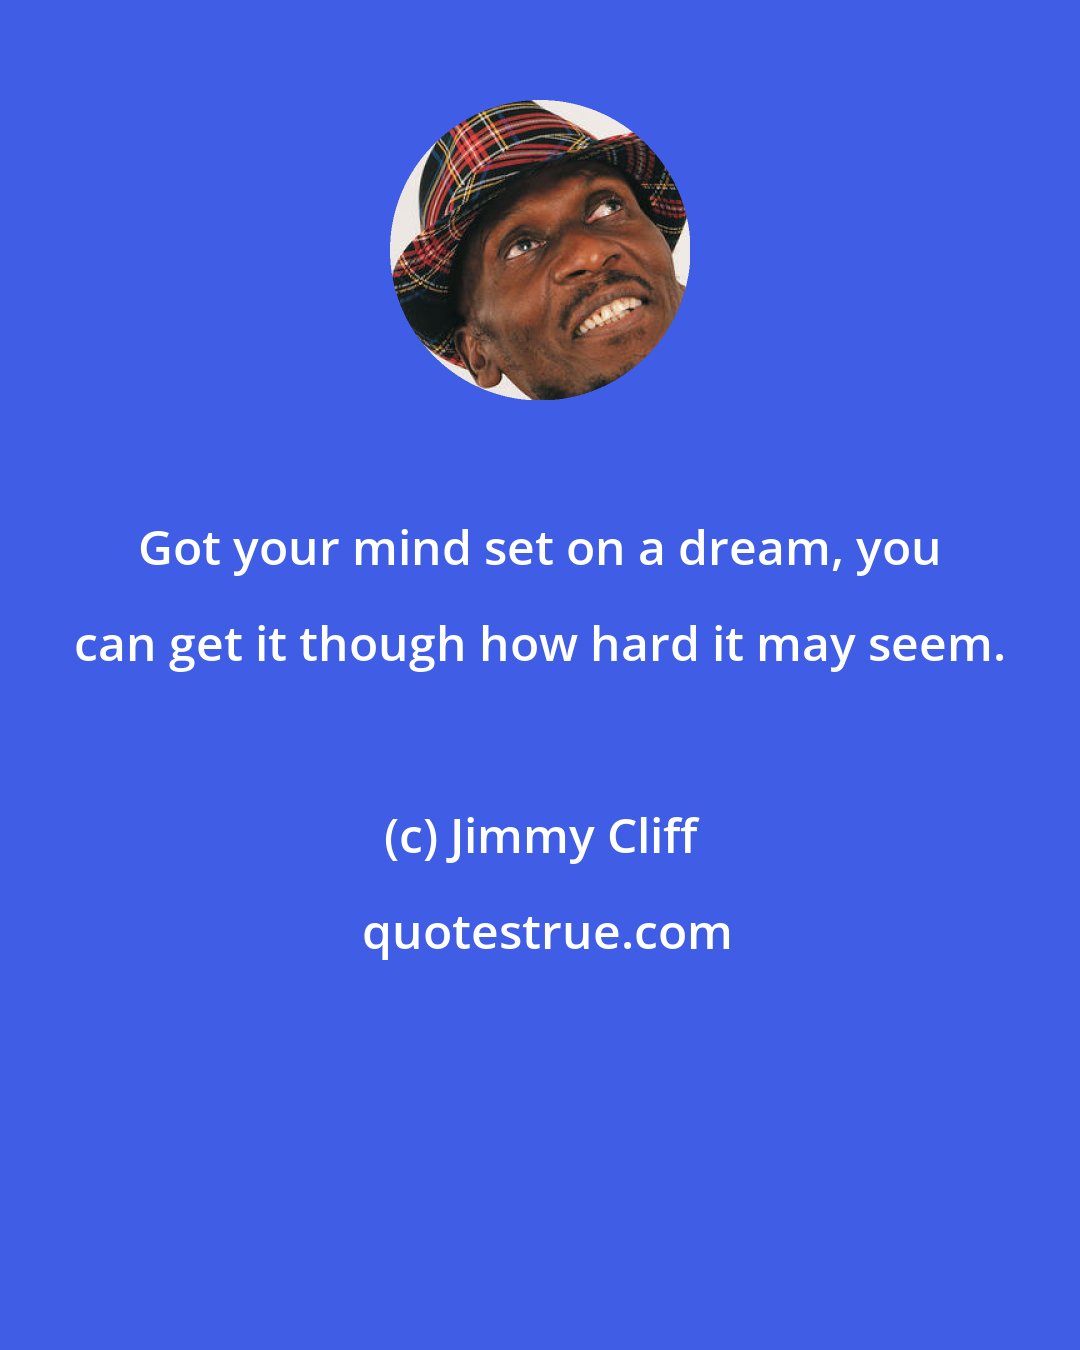 Jimmy Cliff: Got your mind set on a dream, you can get it though how hard it may seem.